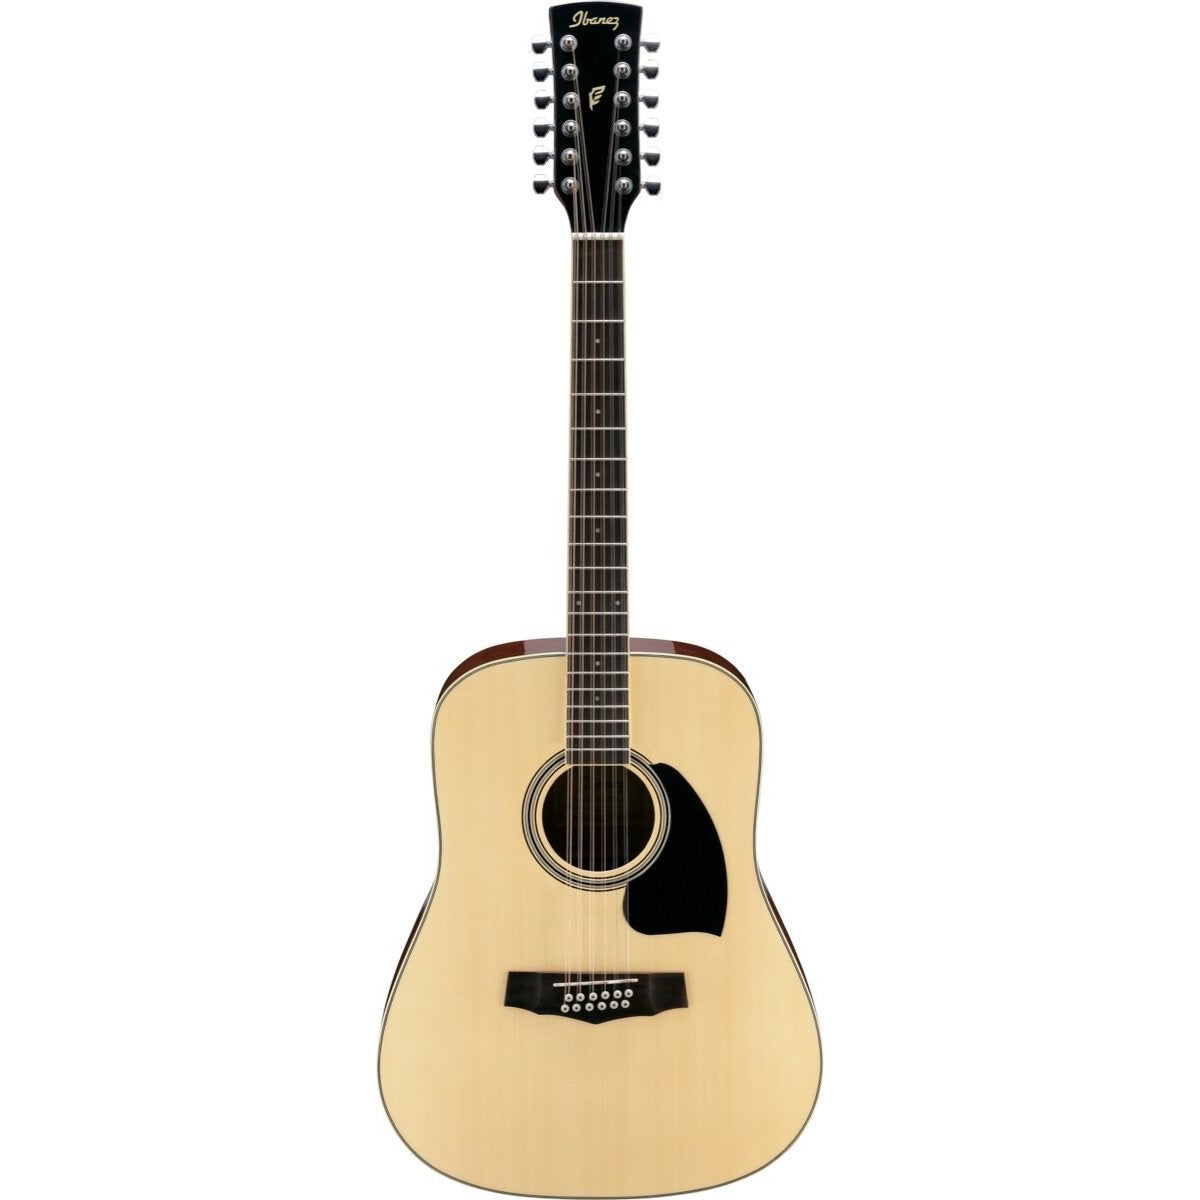 Ibanez PF1512 Dreadnought Acoustic Guitar, 12-String, Natural